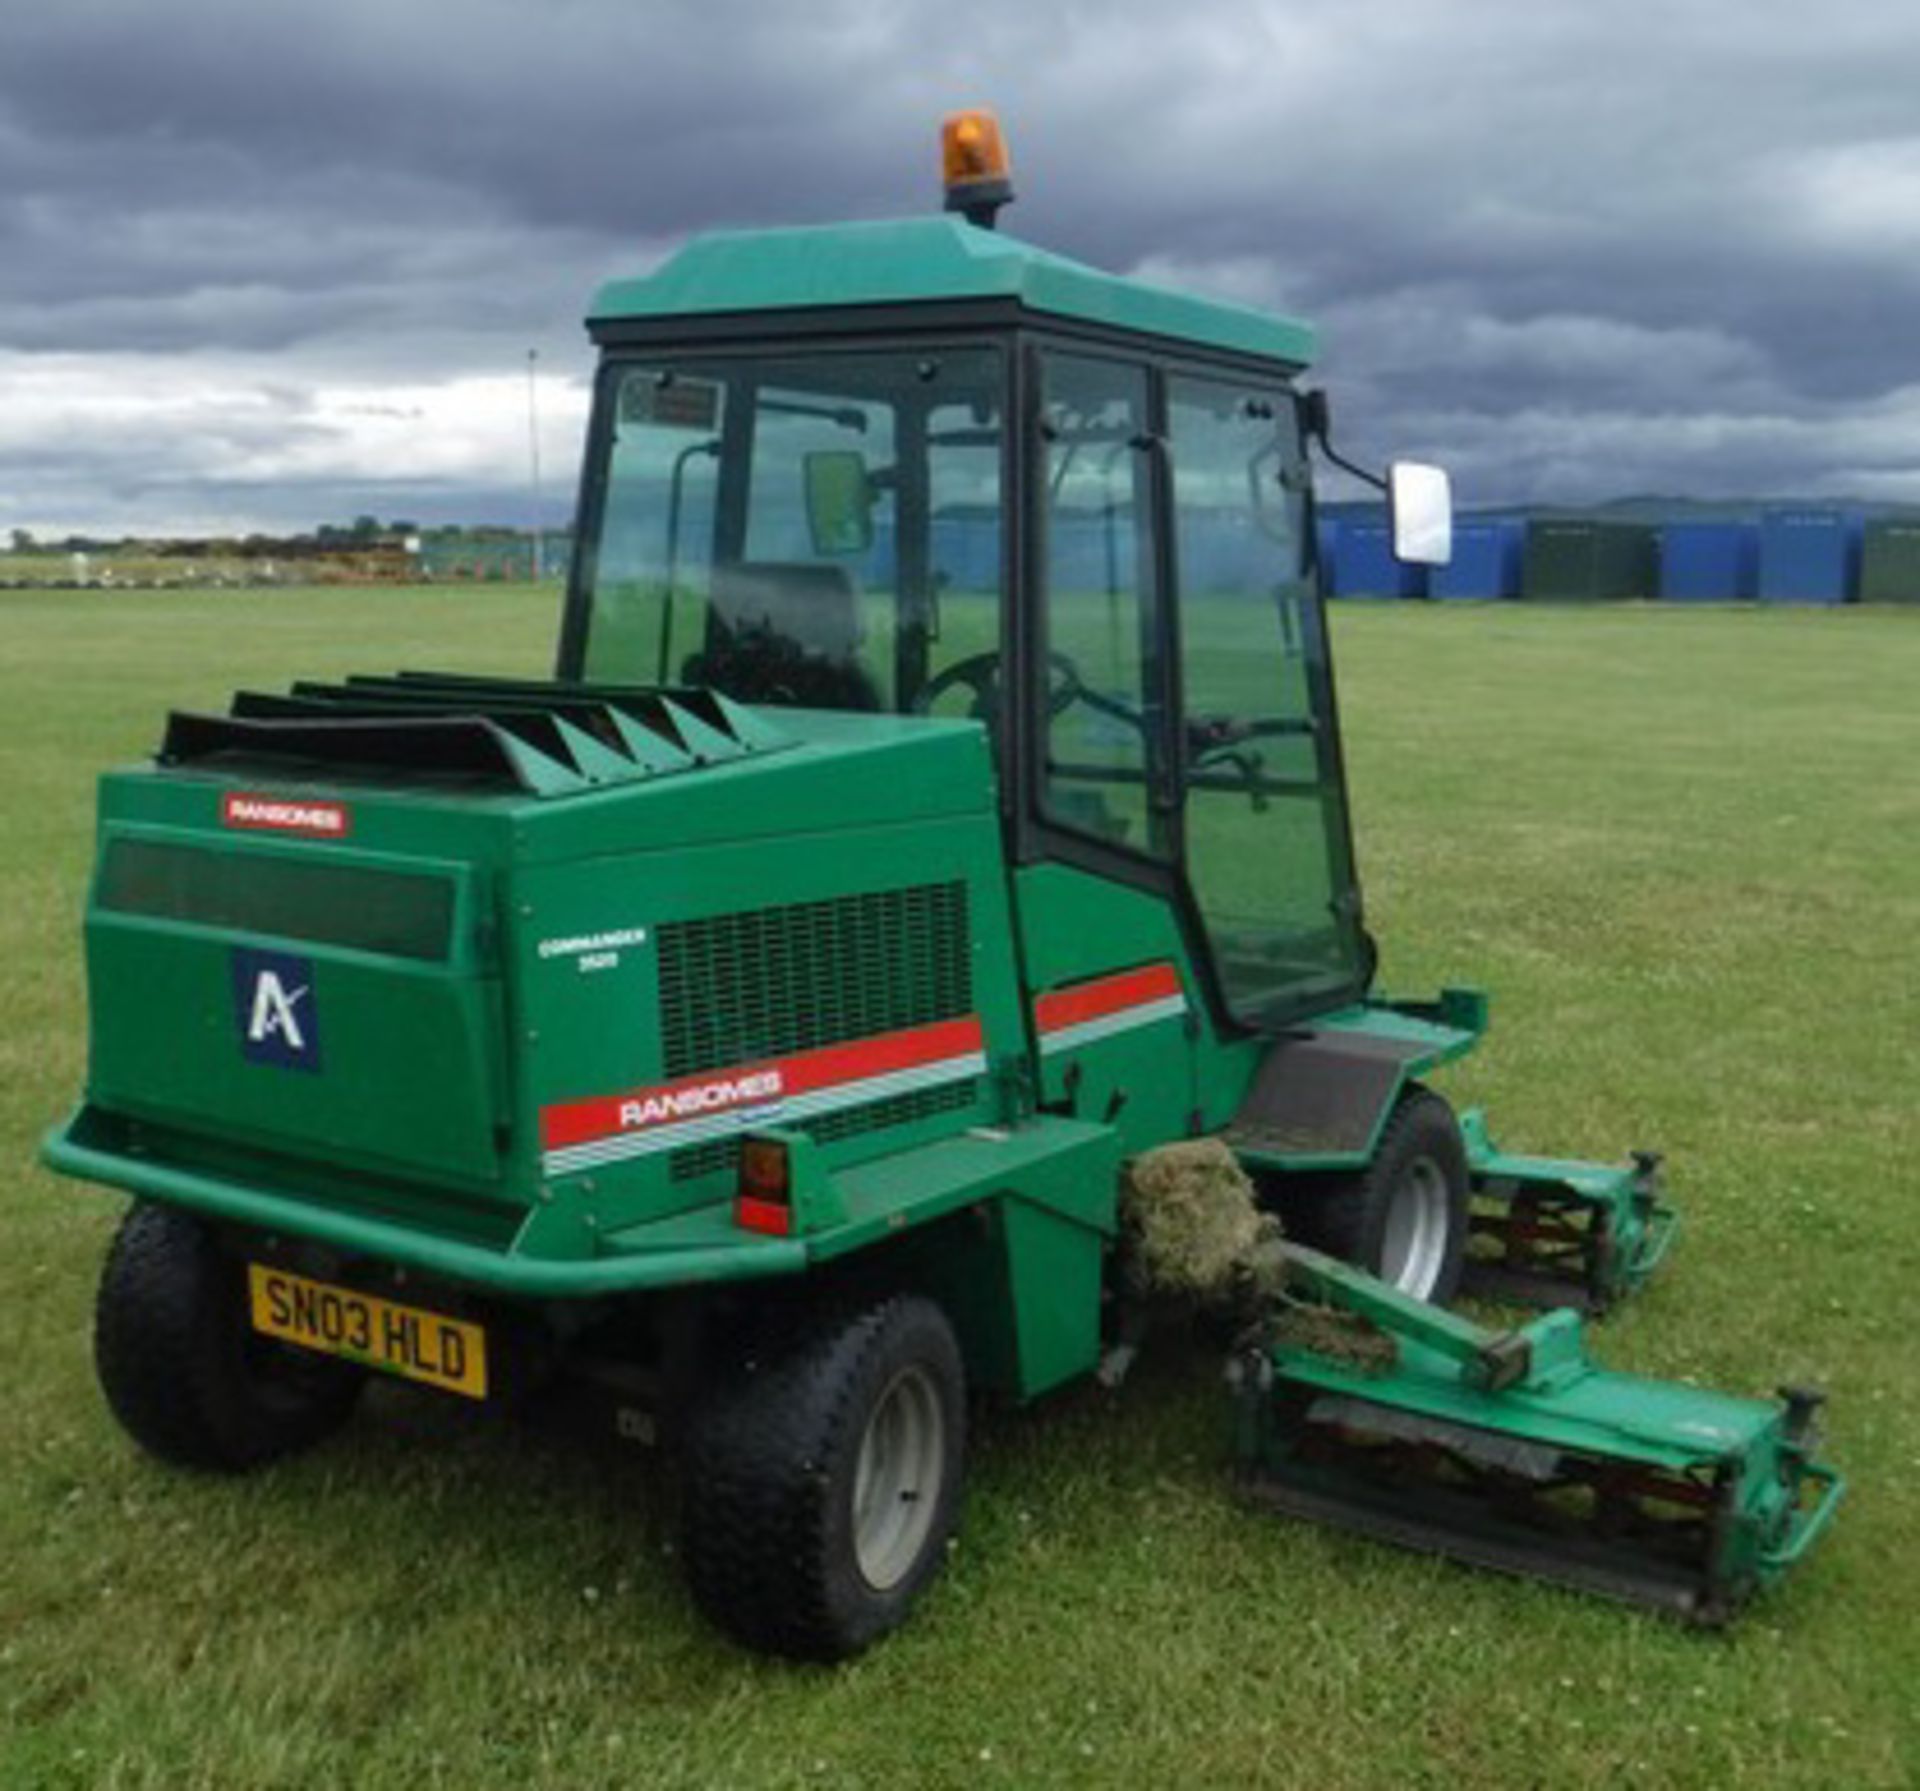 2003 RANSOMES 5 Gang ride on mower. Reg No SN03HLD. 4407hrs (correct) c/w Ransomes safety cab - Image 25 of 34